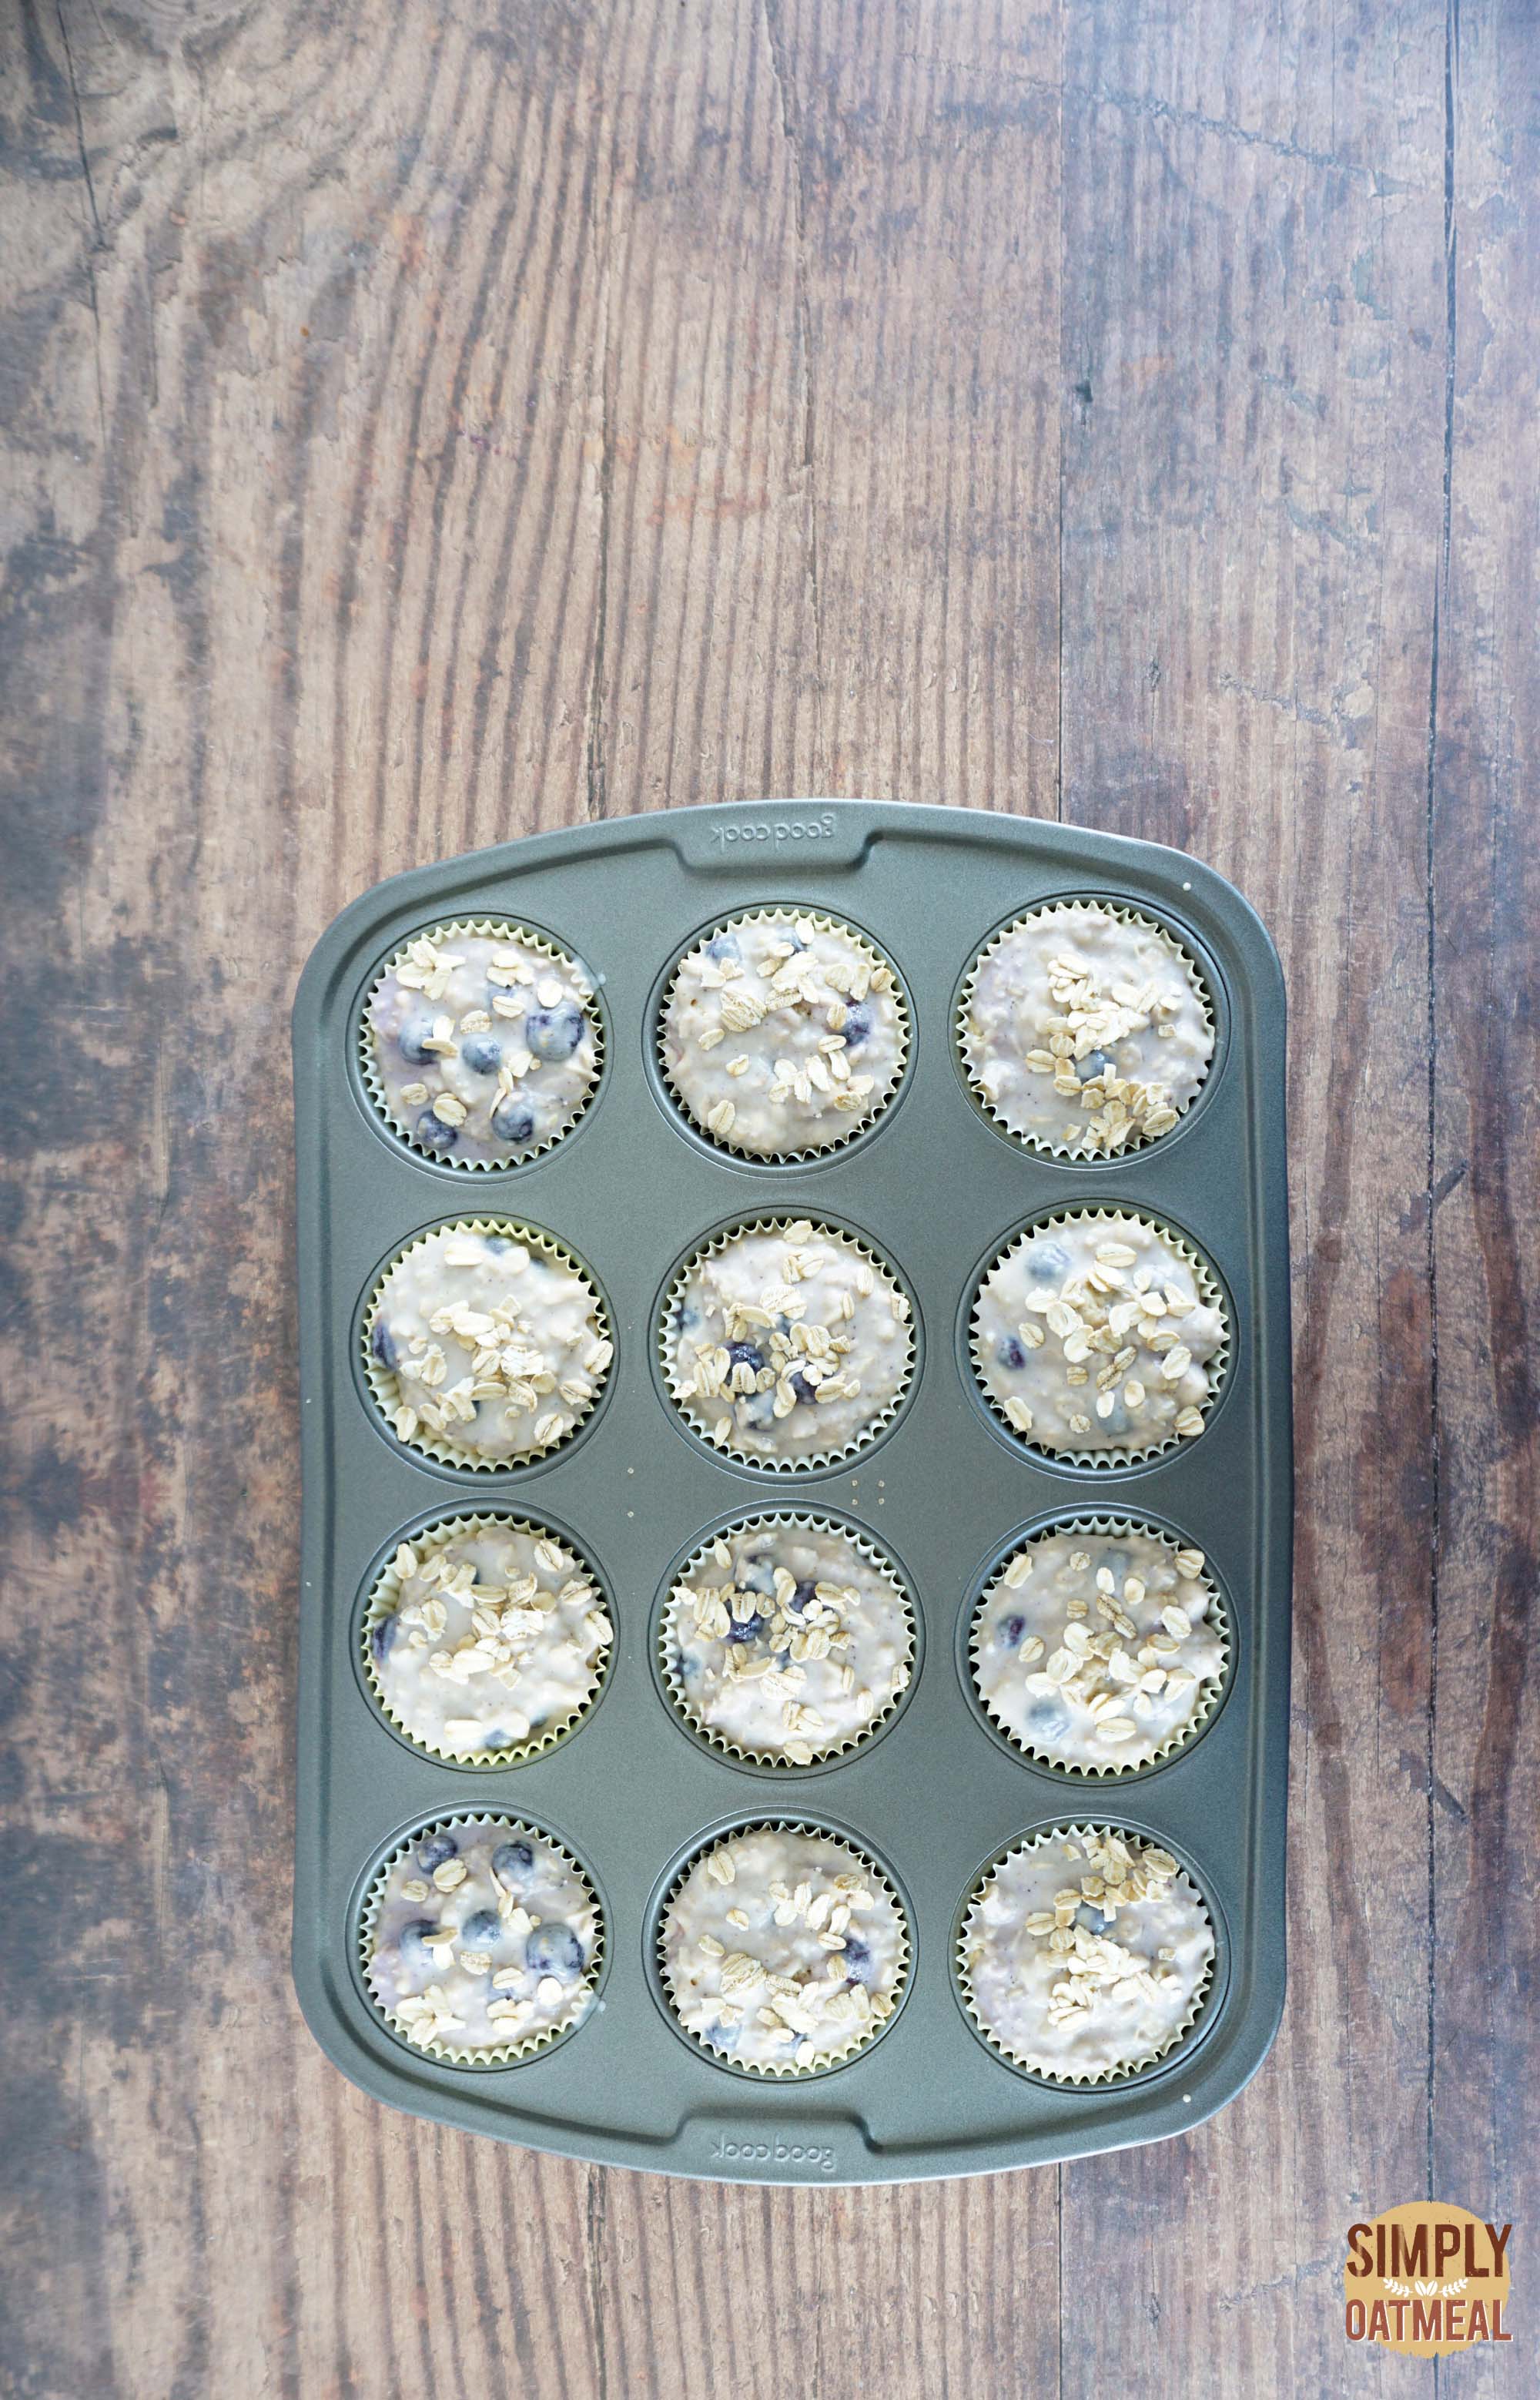 Blueberry lemon oatmeal muffins batter in a muffin pan